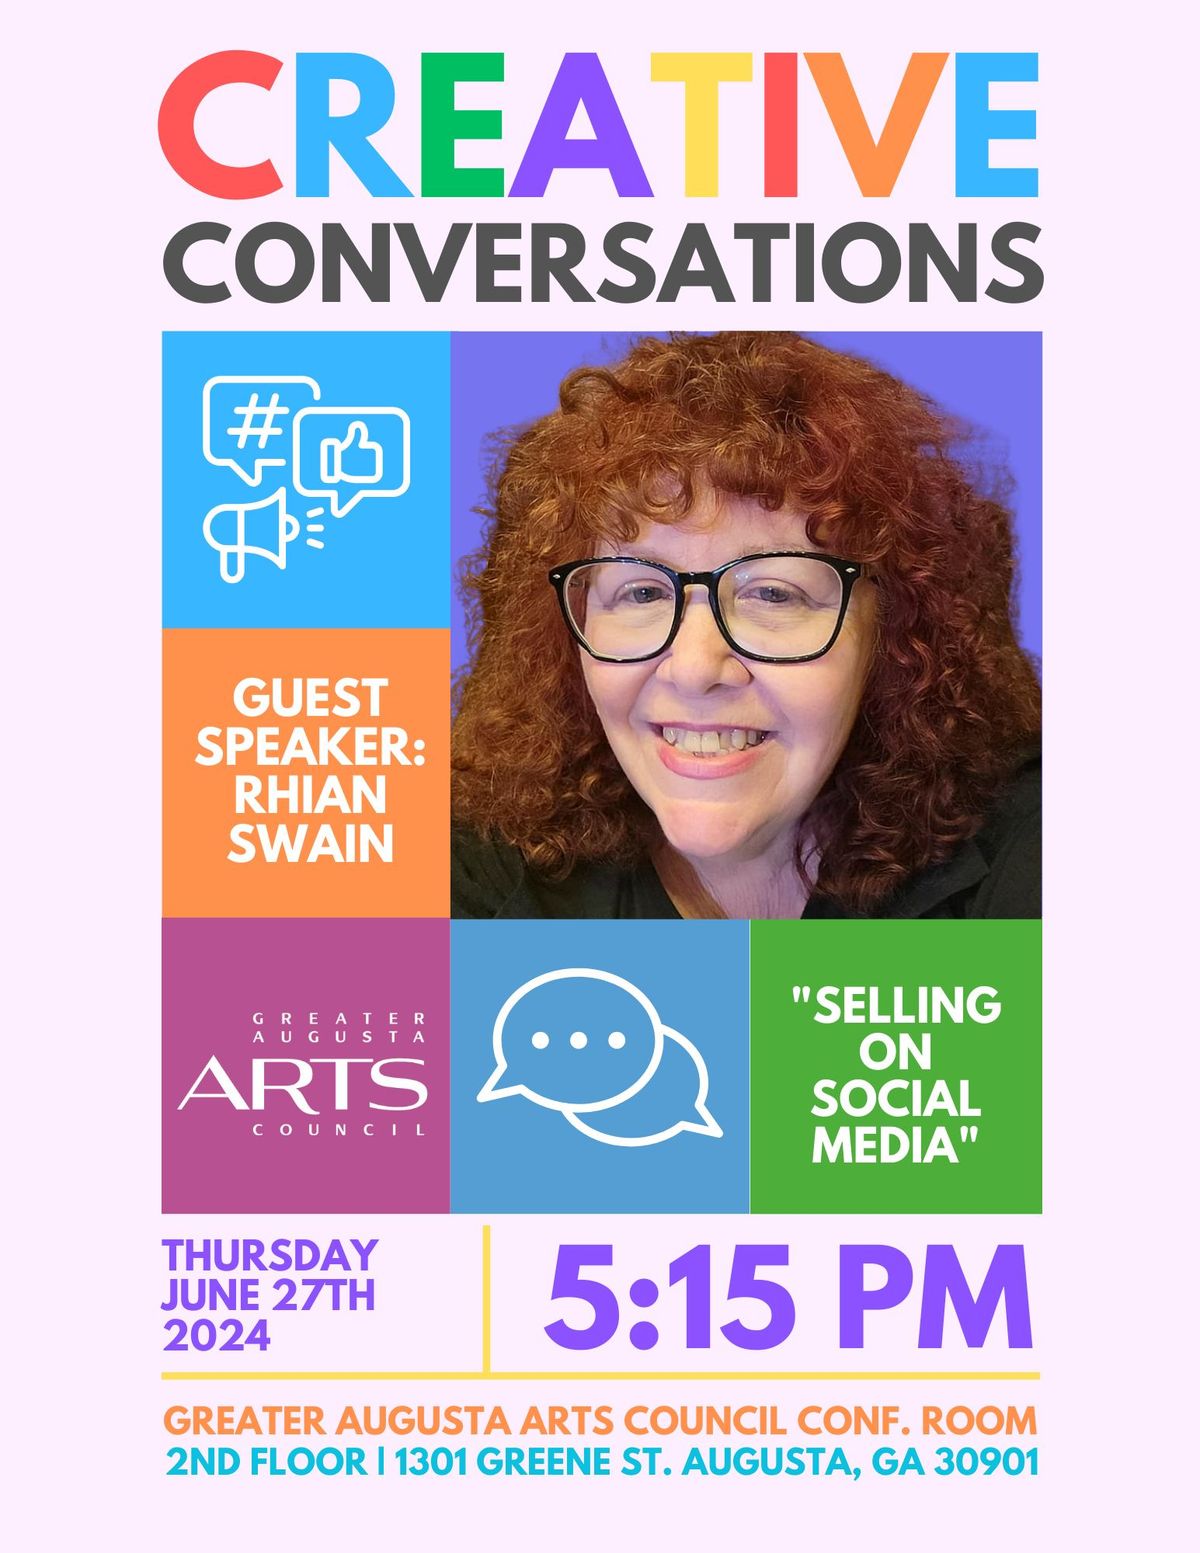 Creative Conversation with Rhian Swain on "Selling on Social Media"